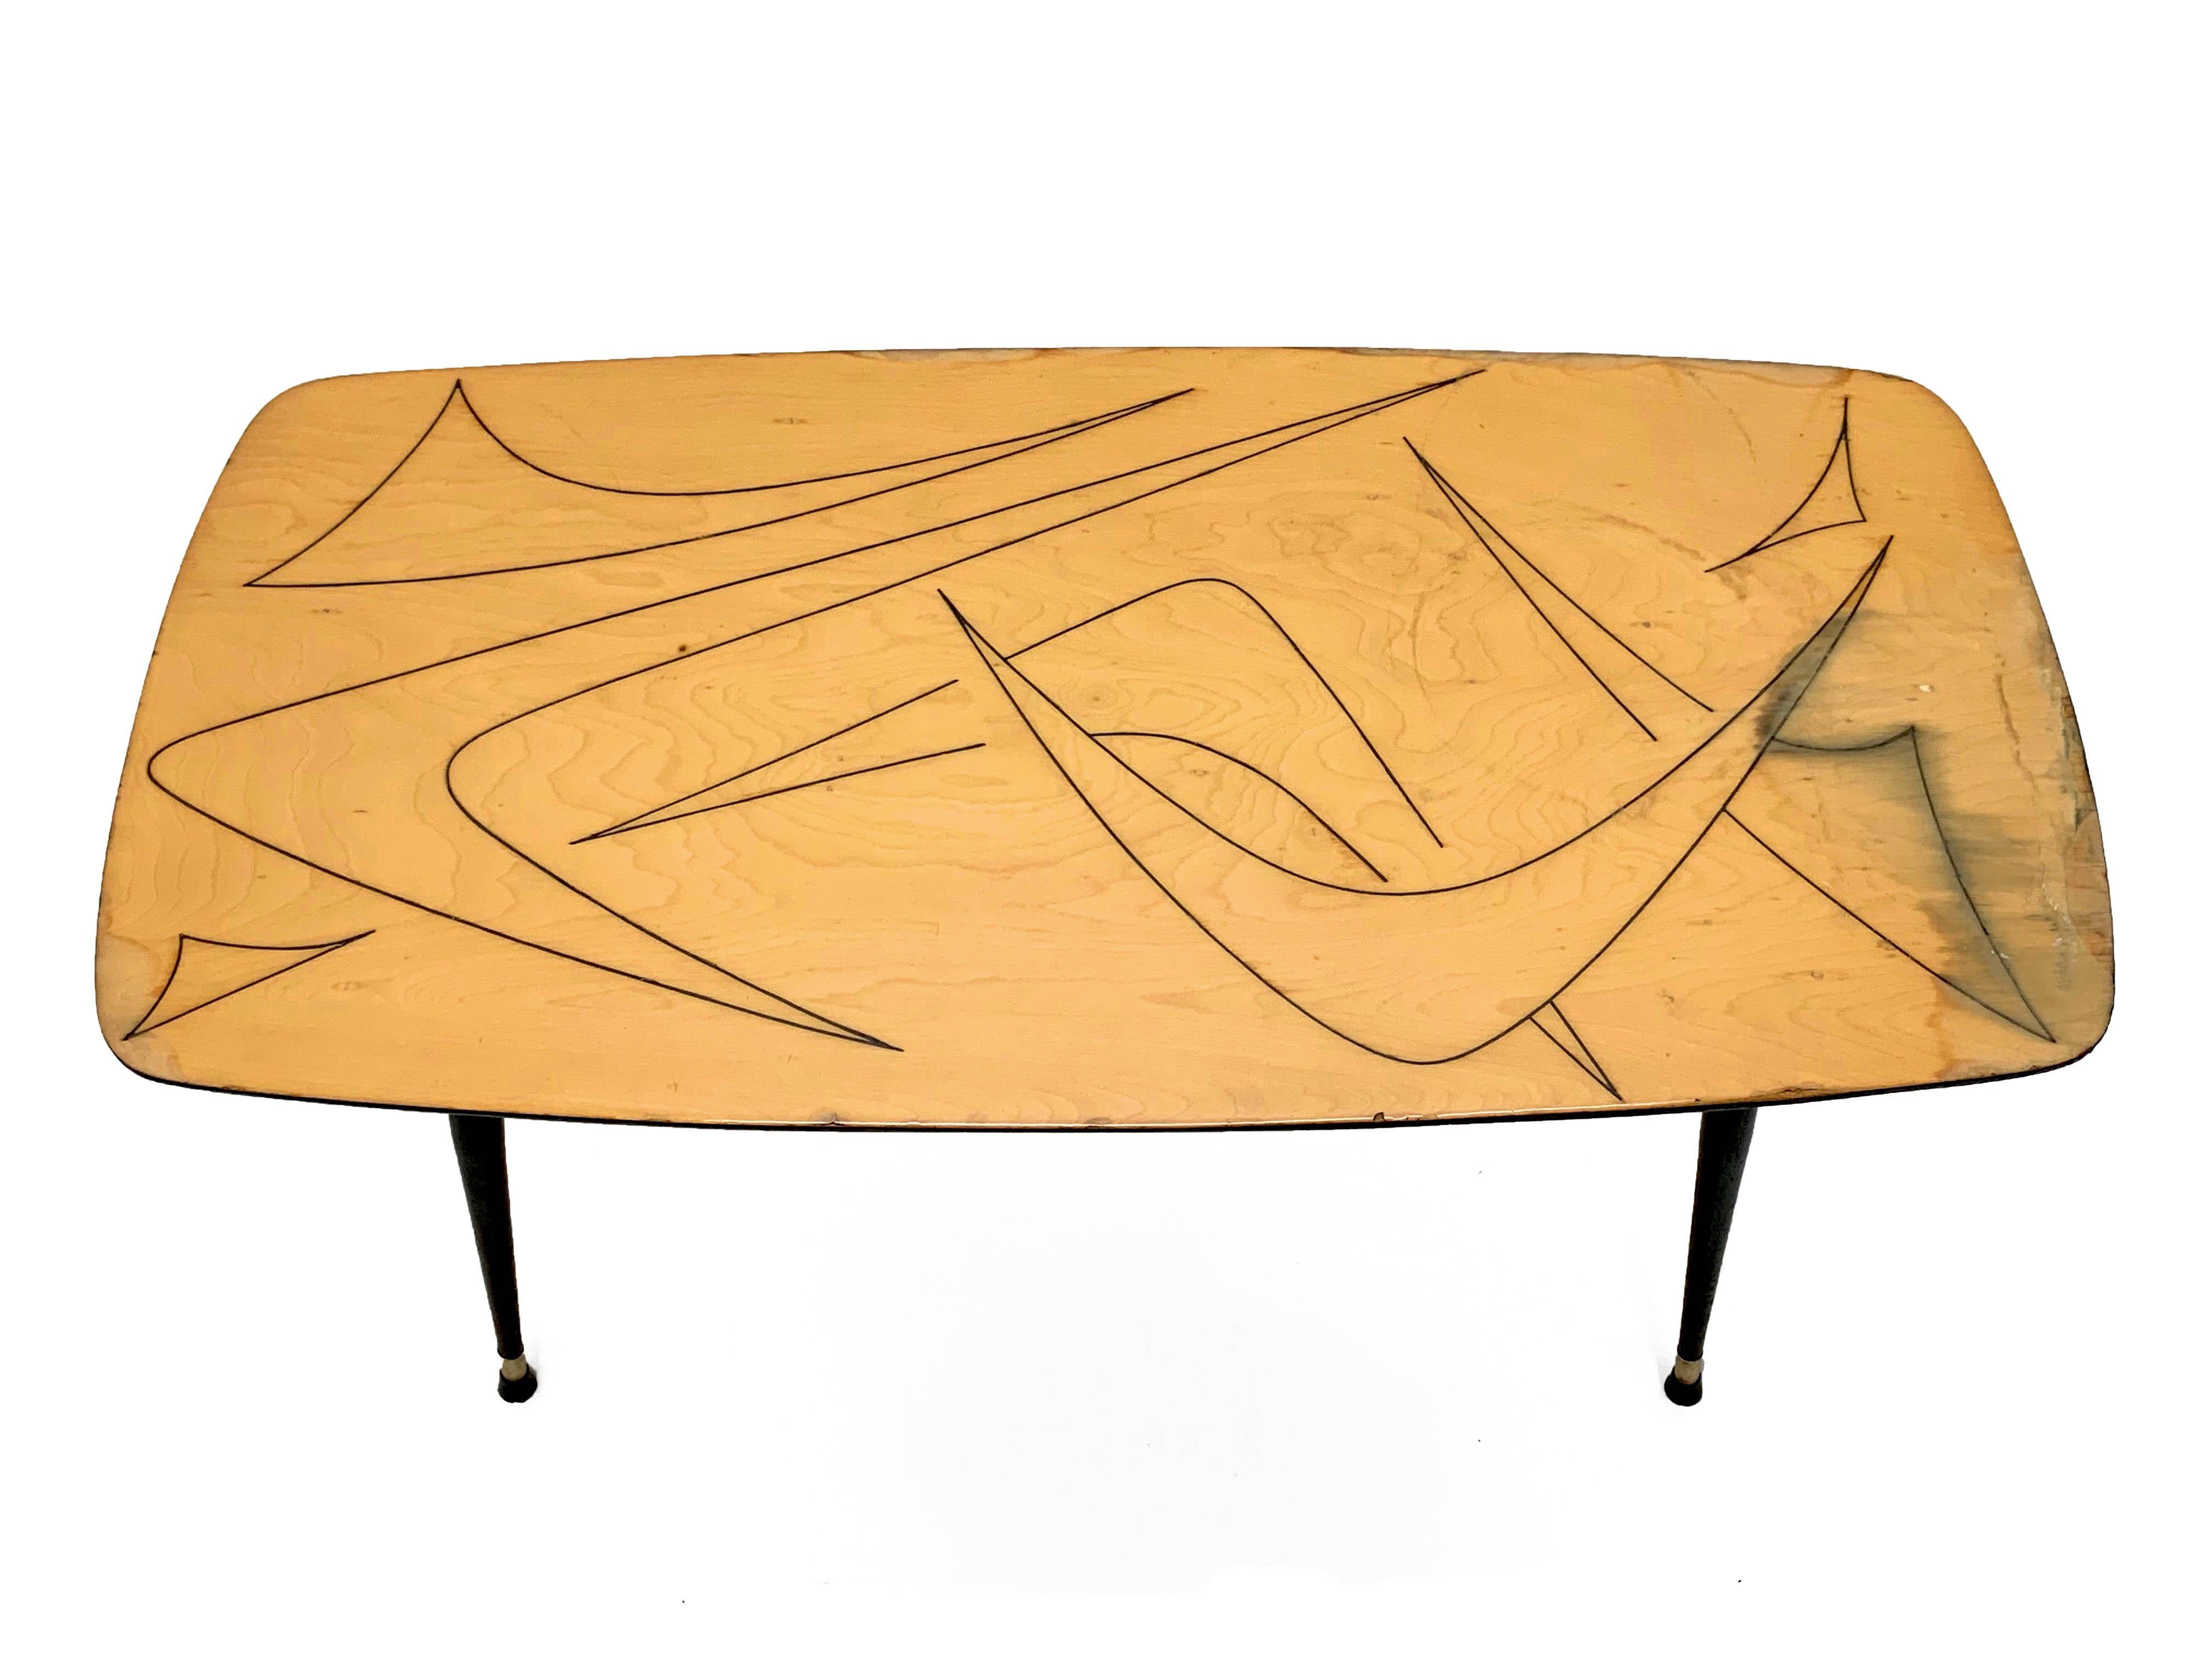 Midcentury Italian Painted Wood, Brass and Black Metal Coffee Table, 1950s For Sale 3